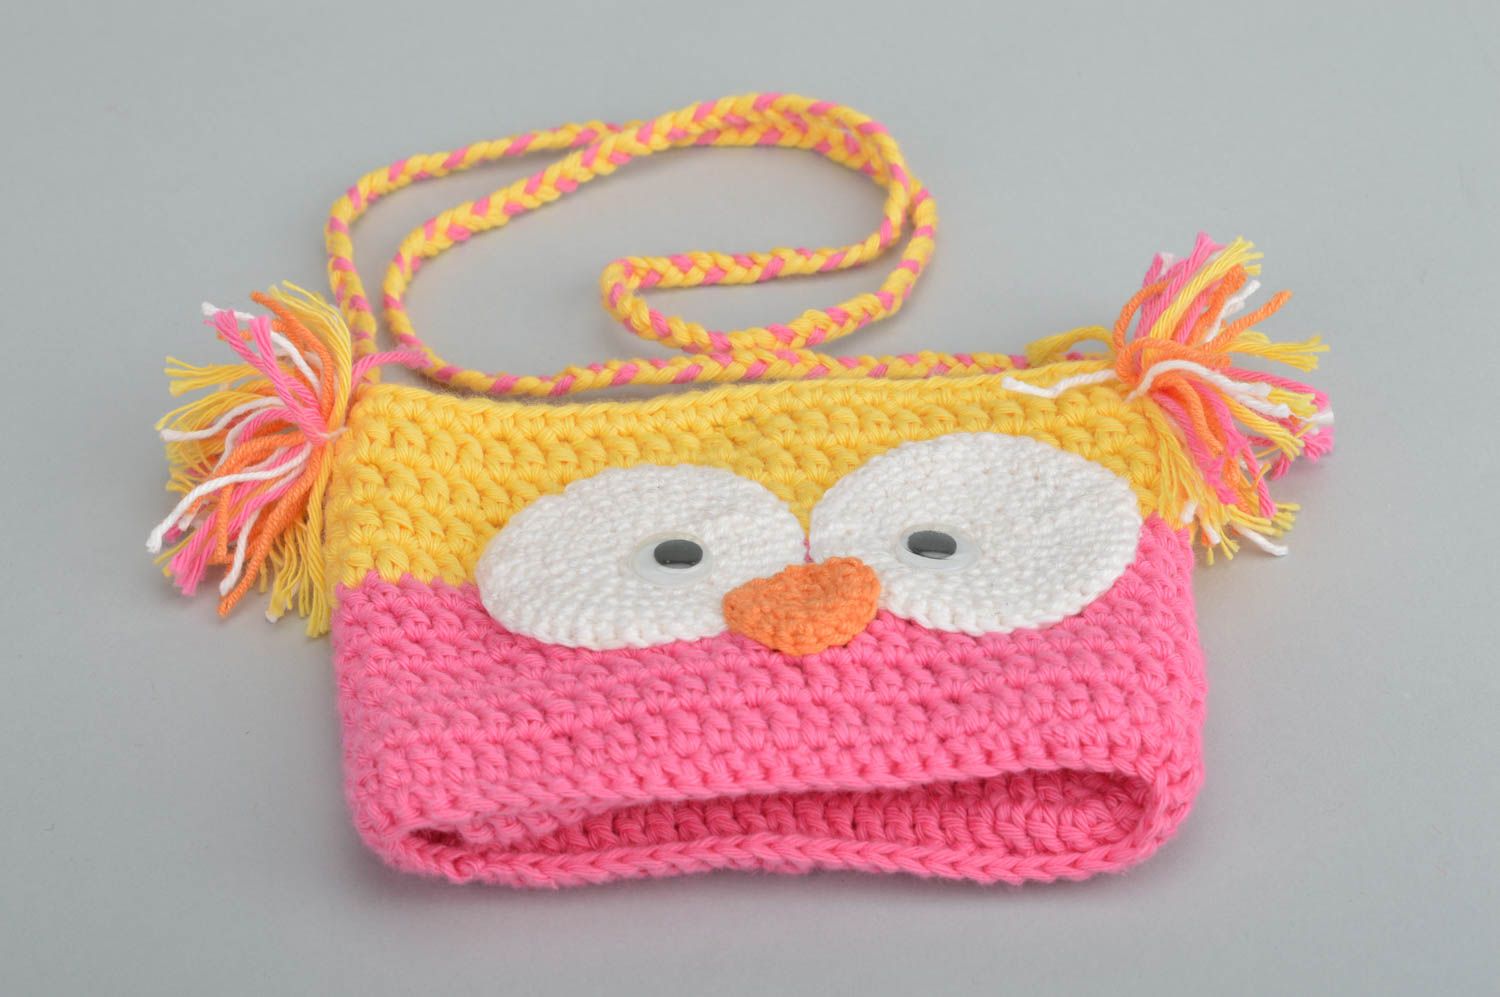 Handmade crocheted beautiful yellow and pink bag for kids in shape of owl photo 2